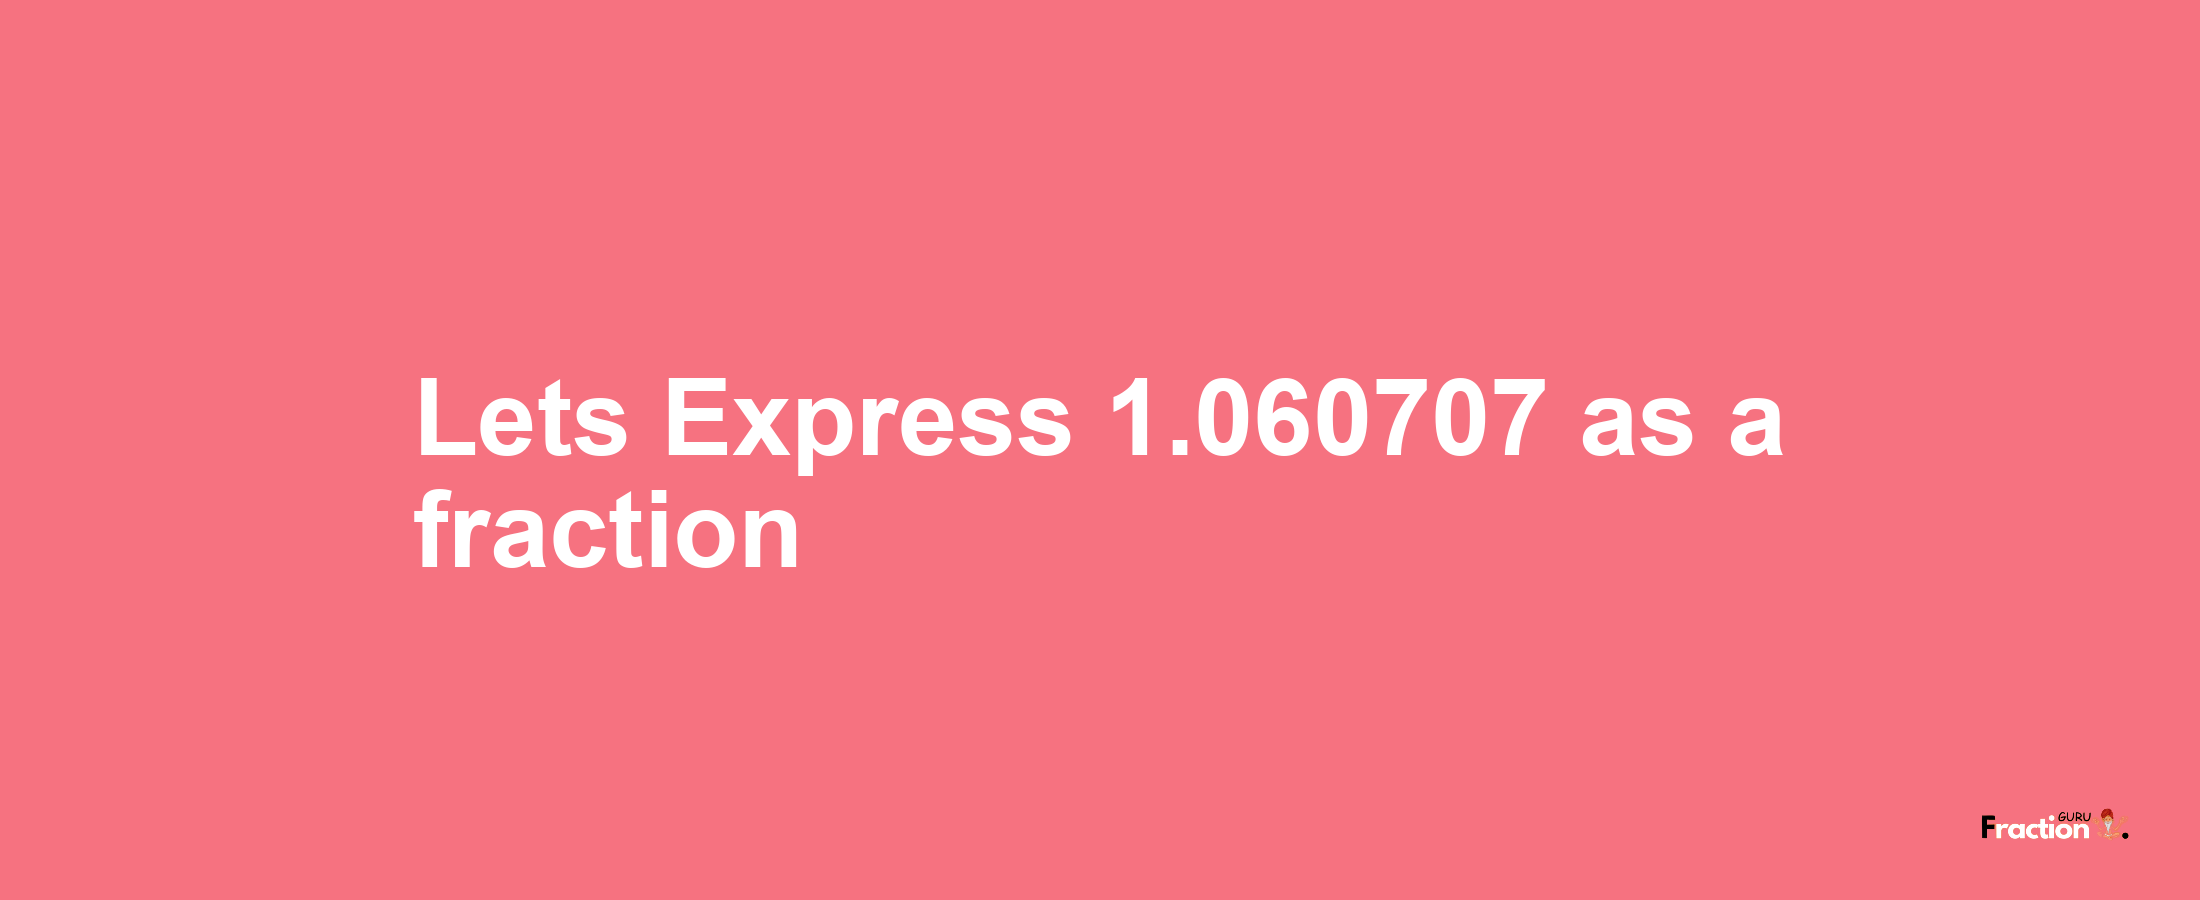 Lets Express 1.060707 as afraction